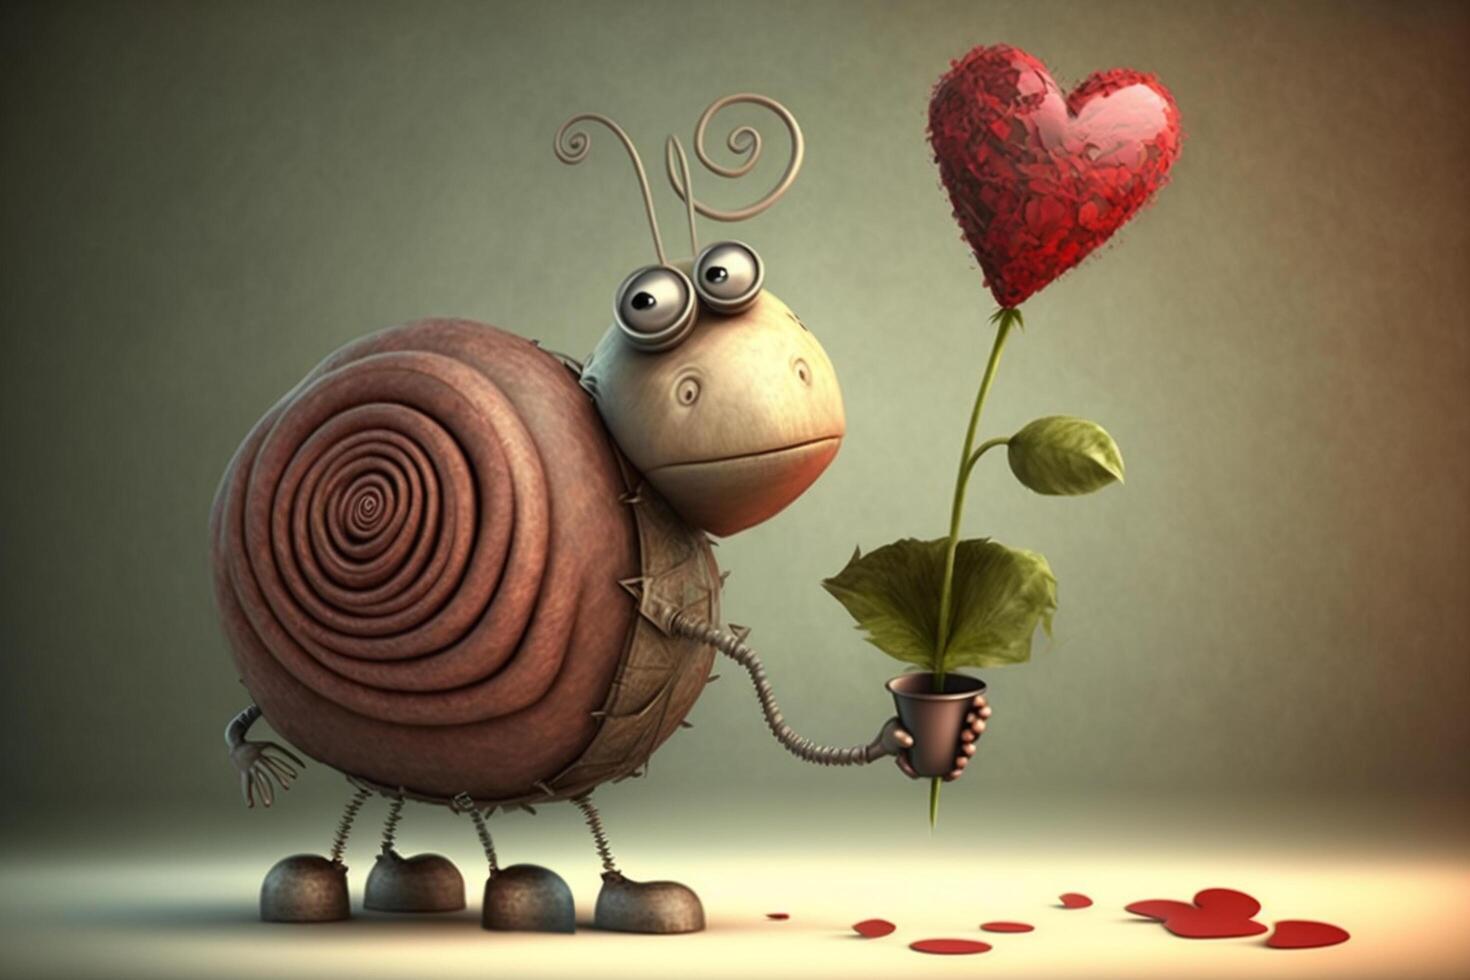 Funny snails celebrate their love for Valentine's Day photo